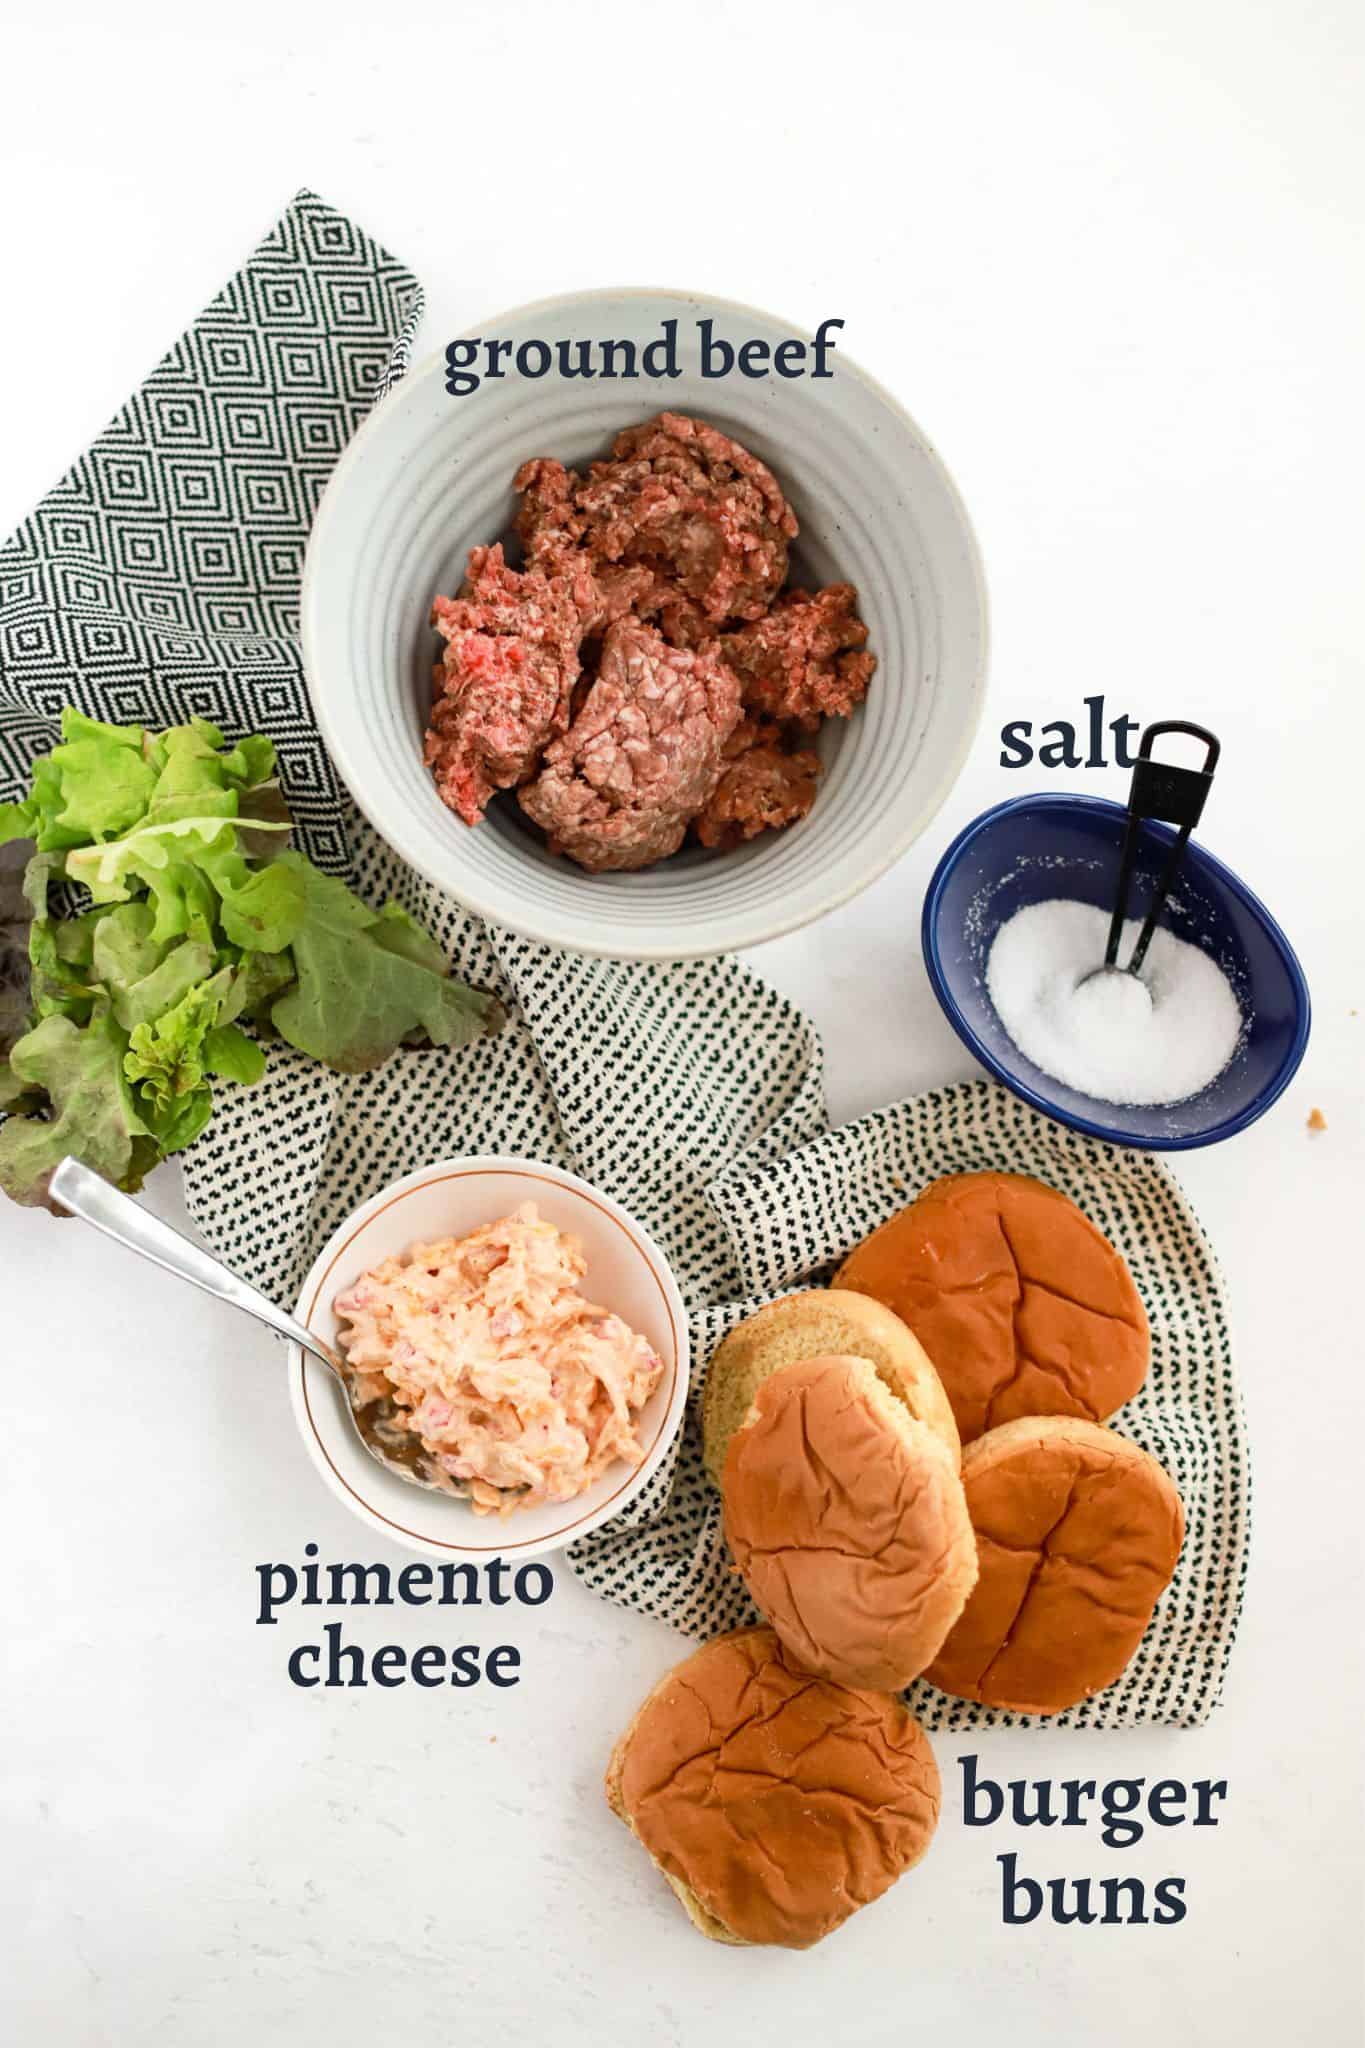 ingredients for cast iron skillet burgers with pimento cheese.